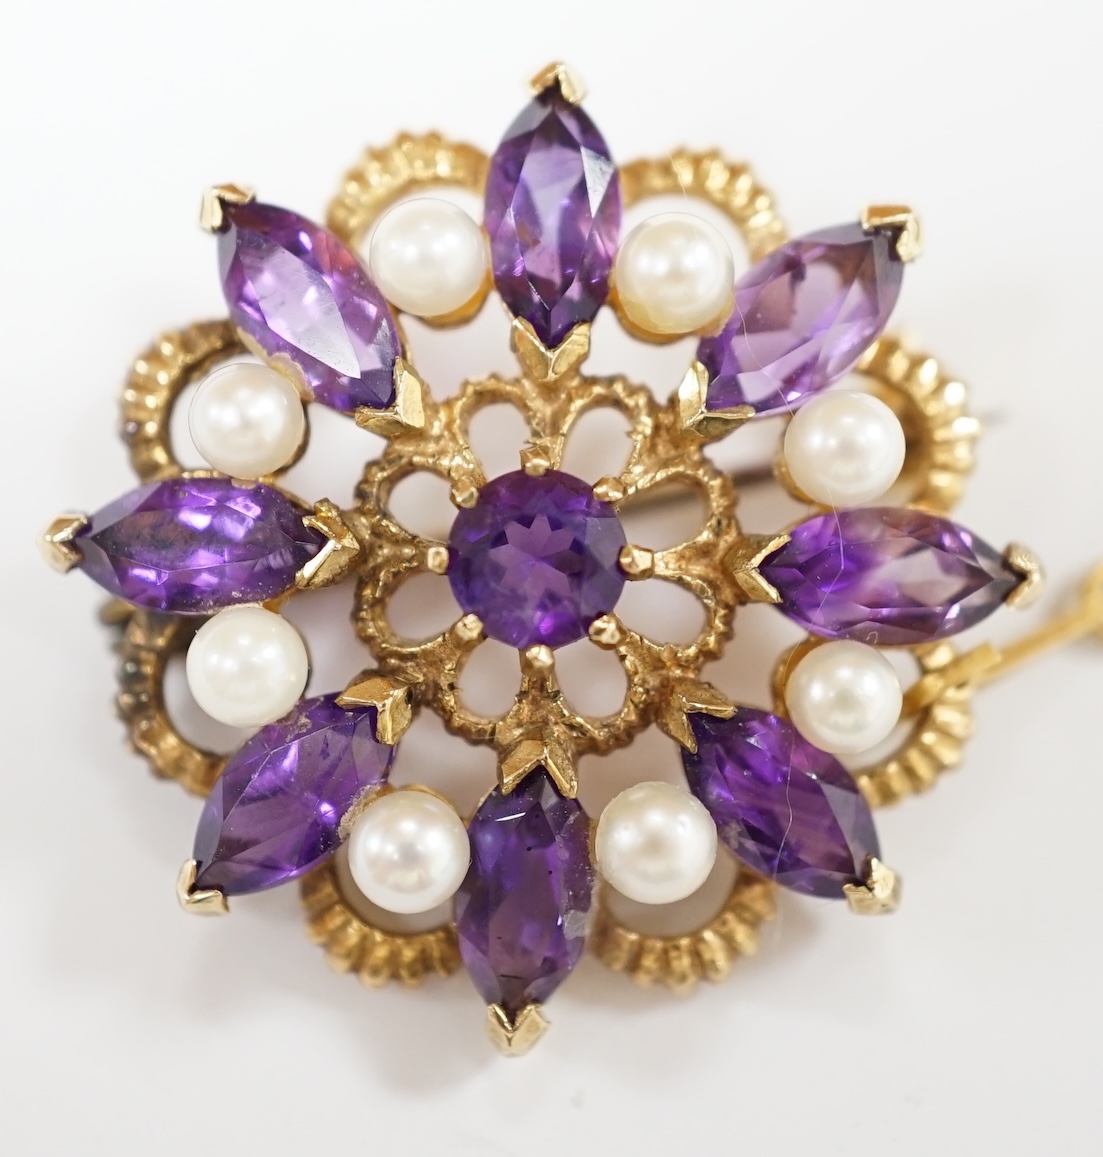 A 1970's 9ct gold, amethyst and cultured pearl cluster set circular brooch, 28mm, gross weight 7.1 grams. Condition - fair to good